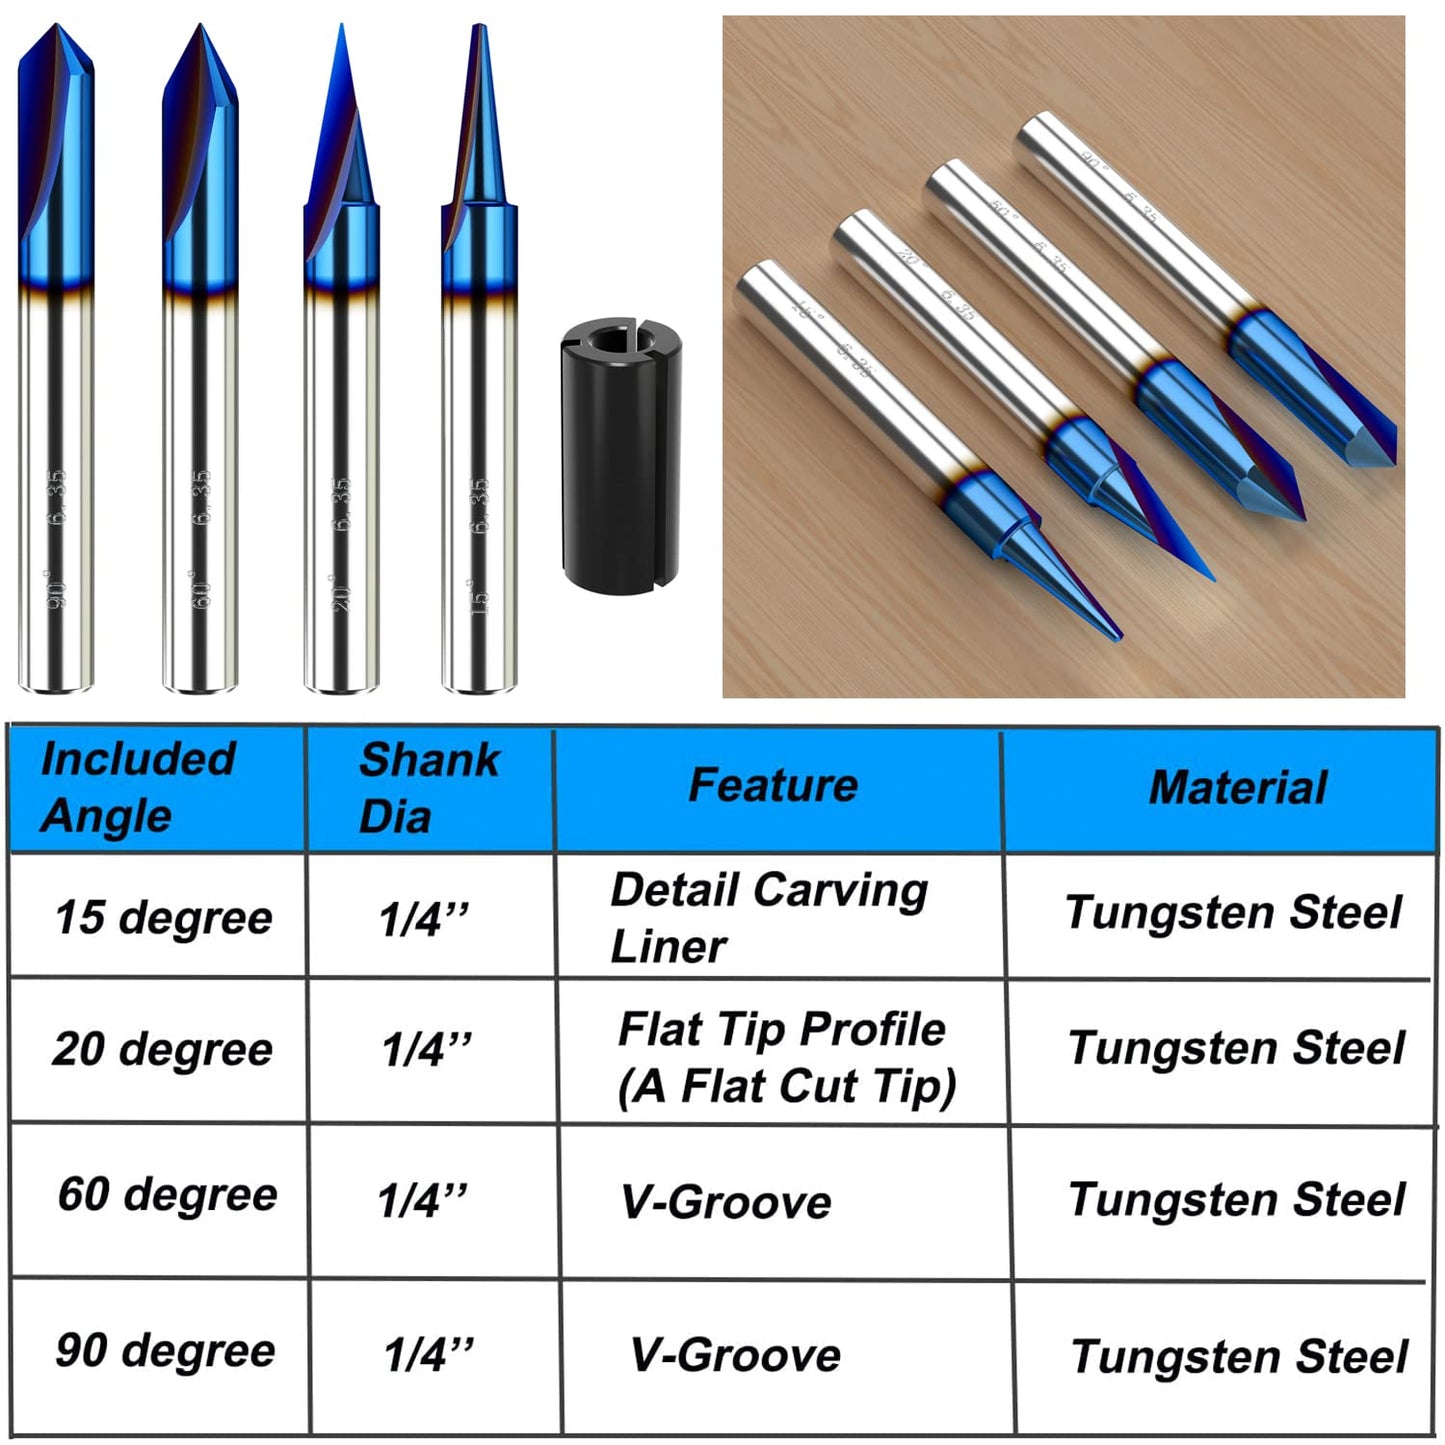 Helovmine Engraving Bits 15, 20, 60, 90 Degree CNC Wood Carving Router Bit Set with Nano Blue Coated, Marking Conical Engraving Router Tool , 2